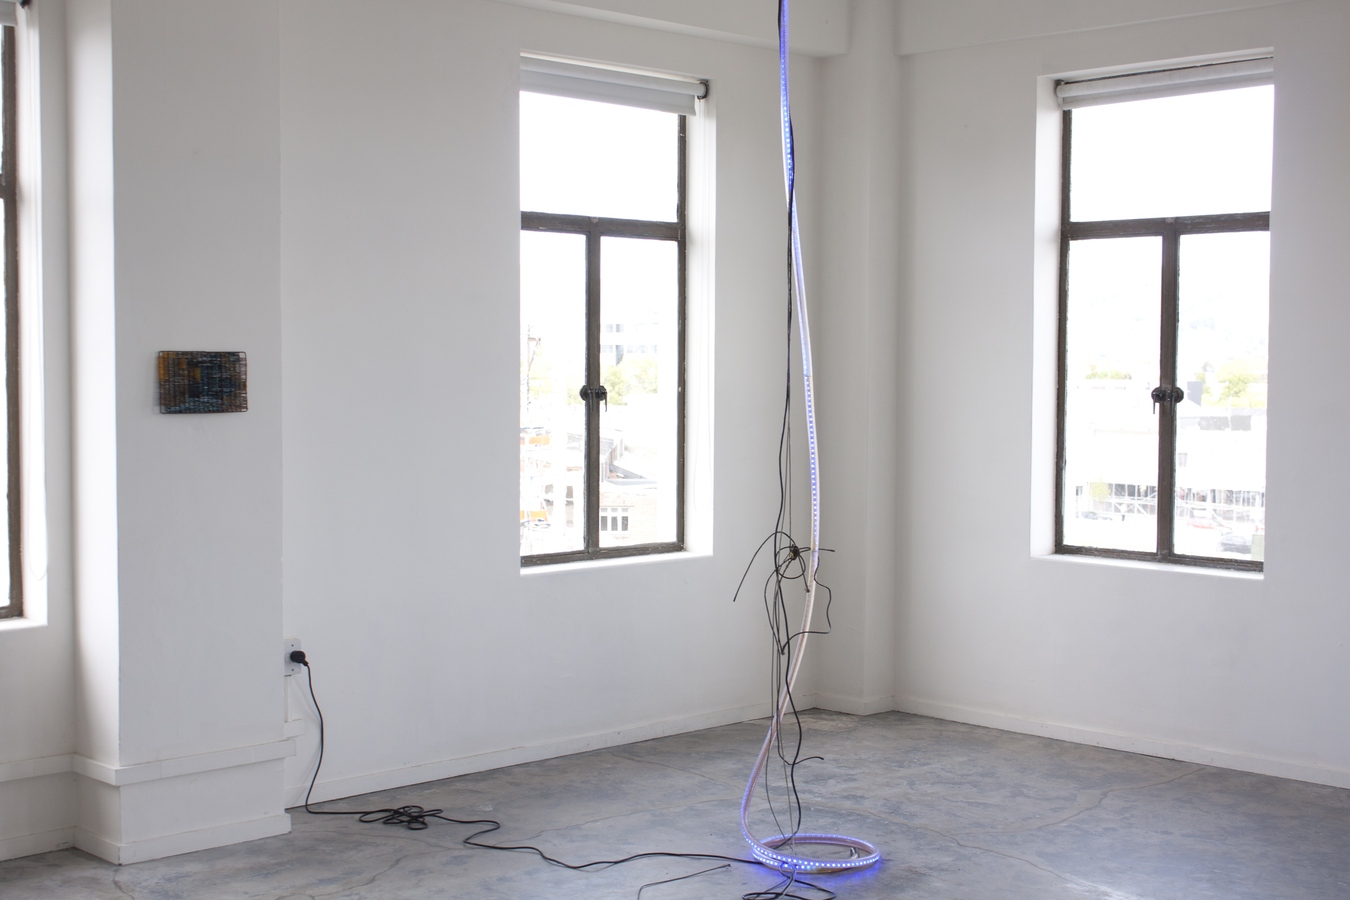 Zoë Paul, LO, Wool on found grill, plastic piping, LED tape, electrics, steel cables, petroleum jelly, oil thickener  2015